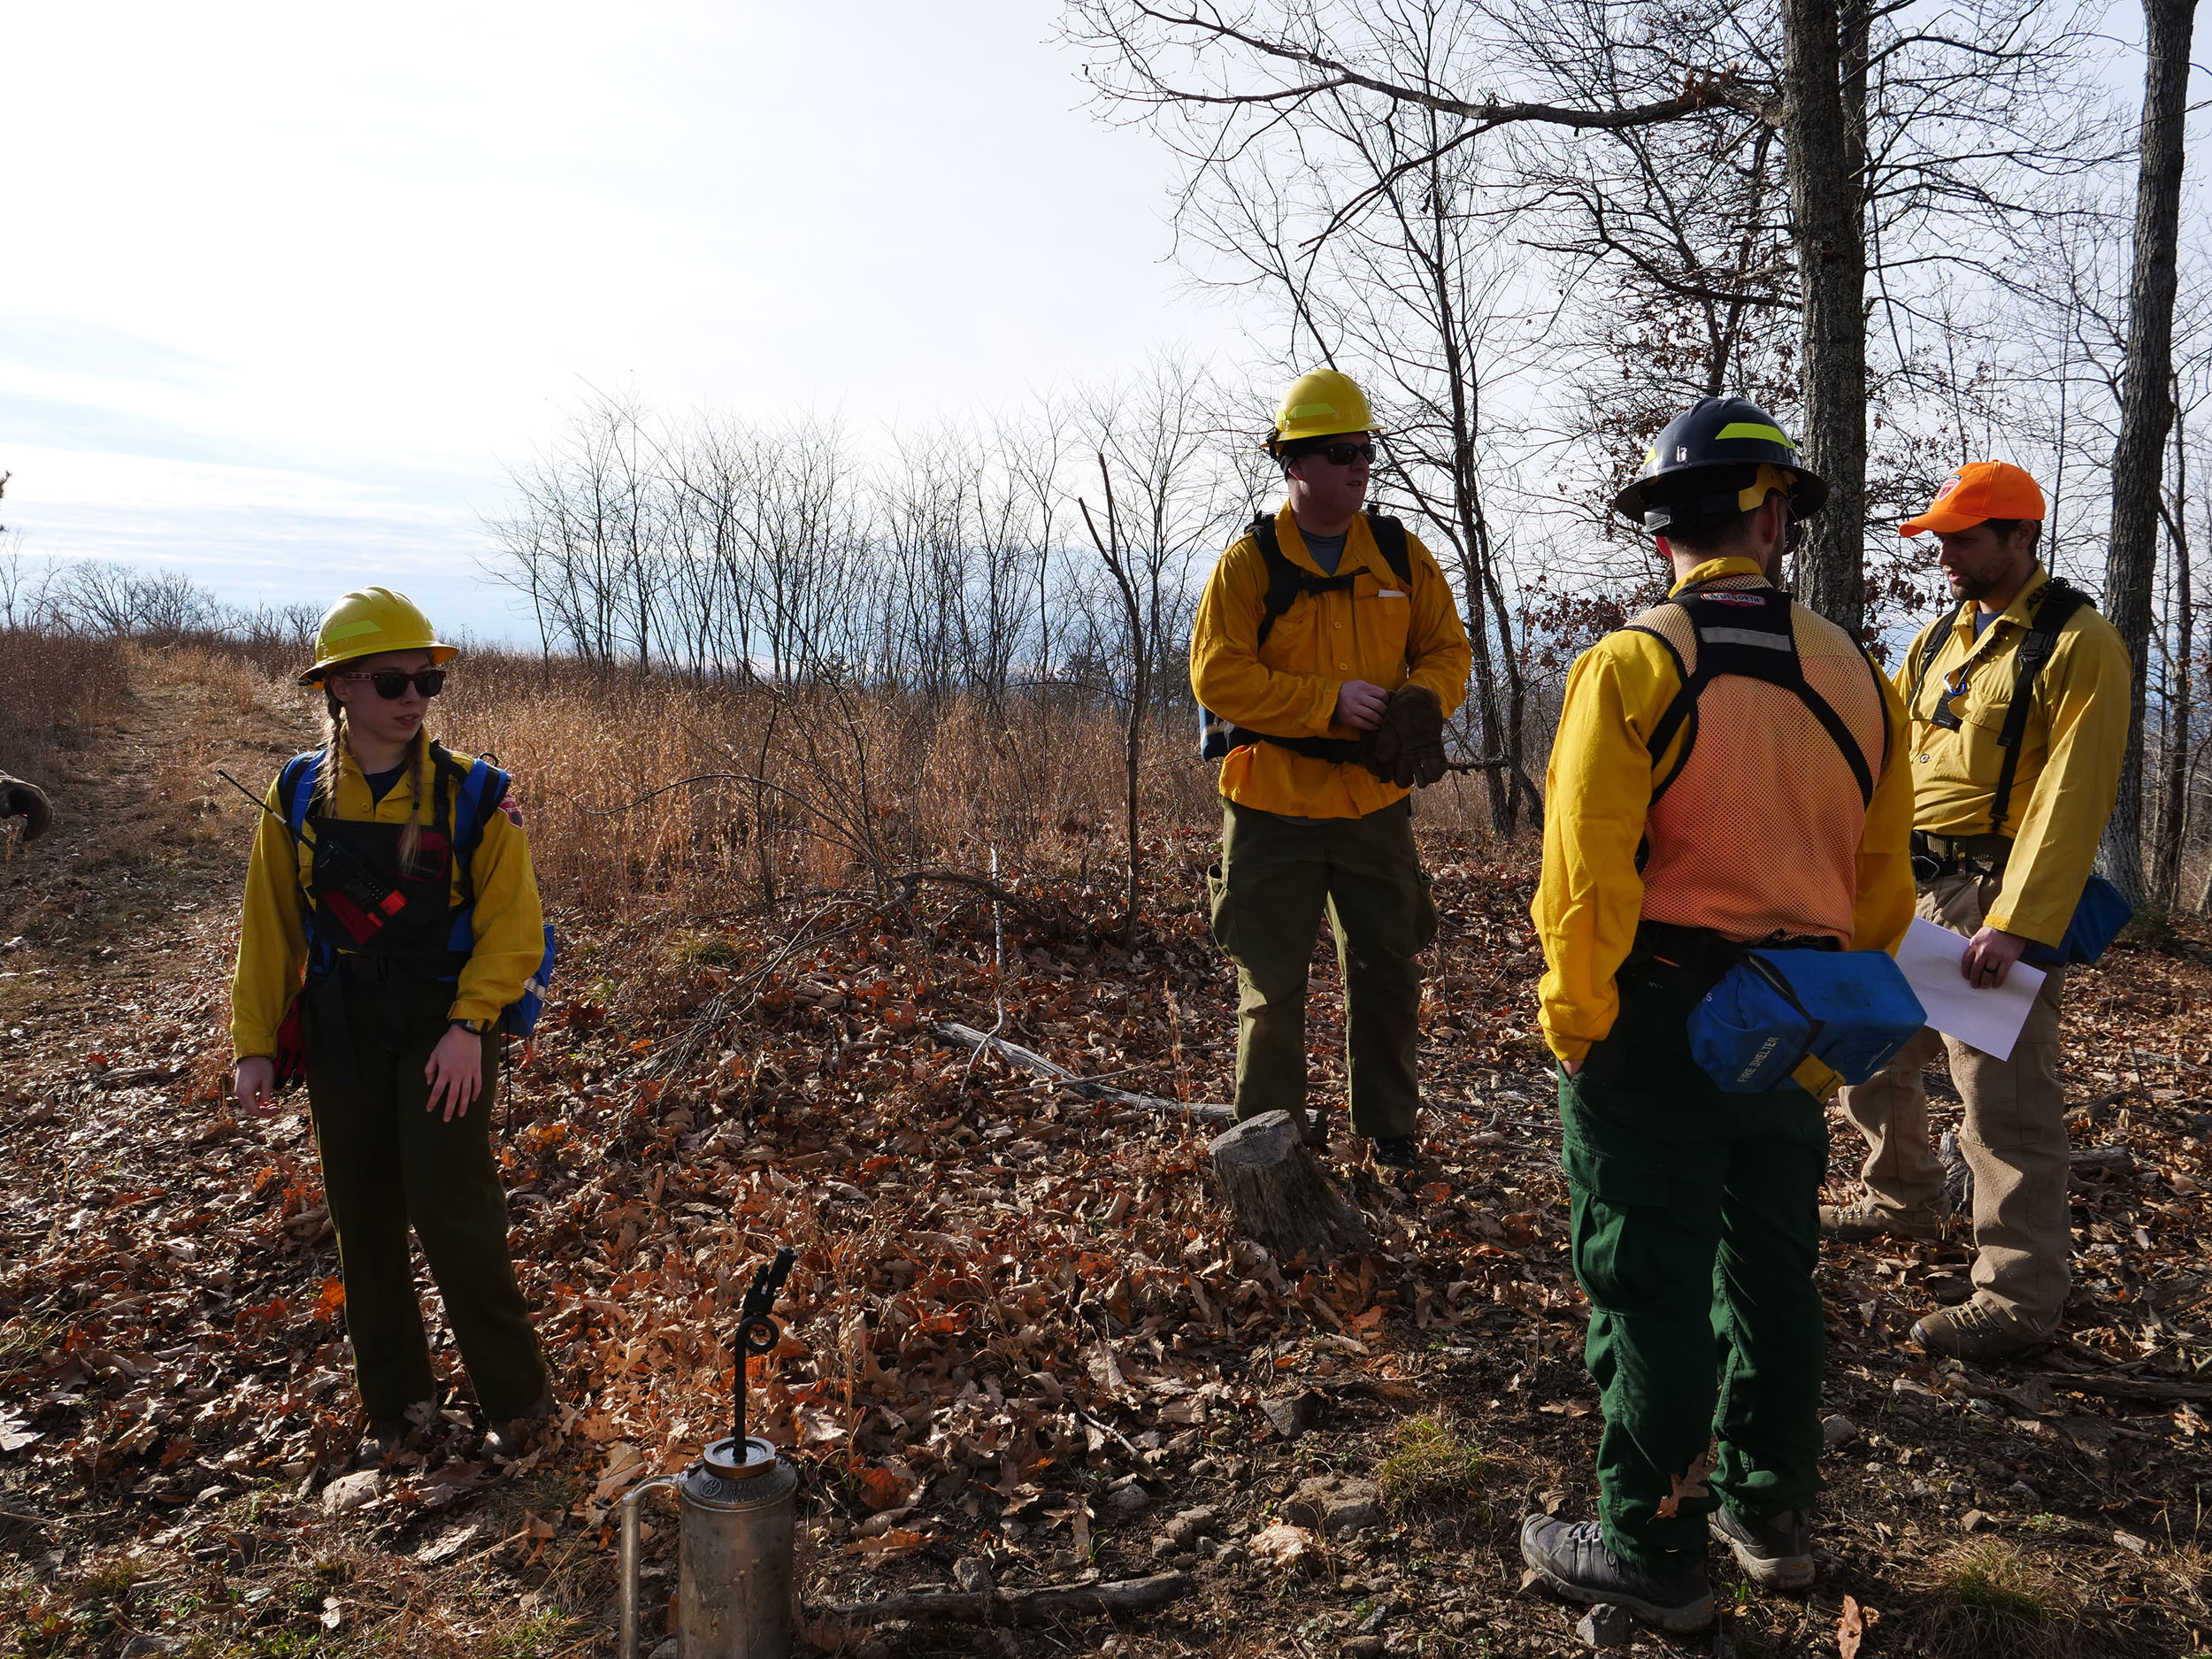 Fire crew members discuss potential ignition techniques prior to the burn